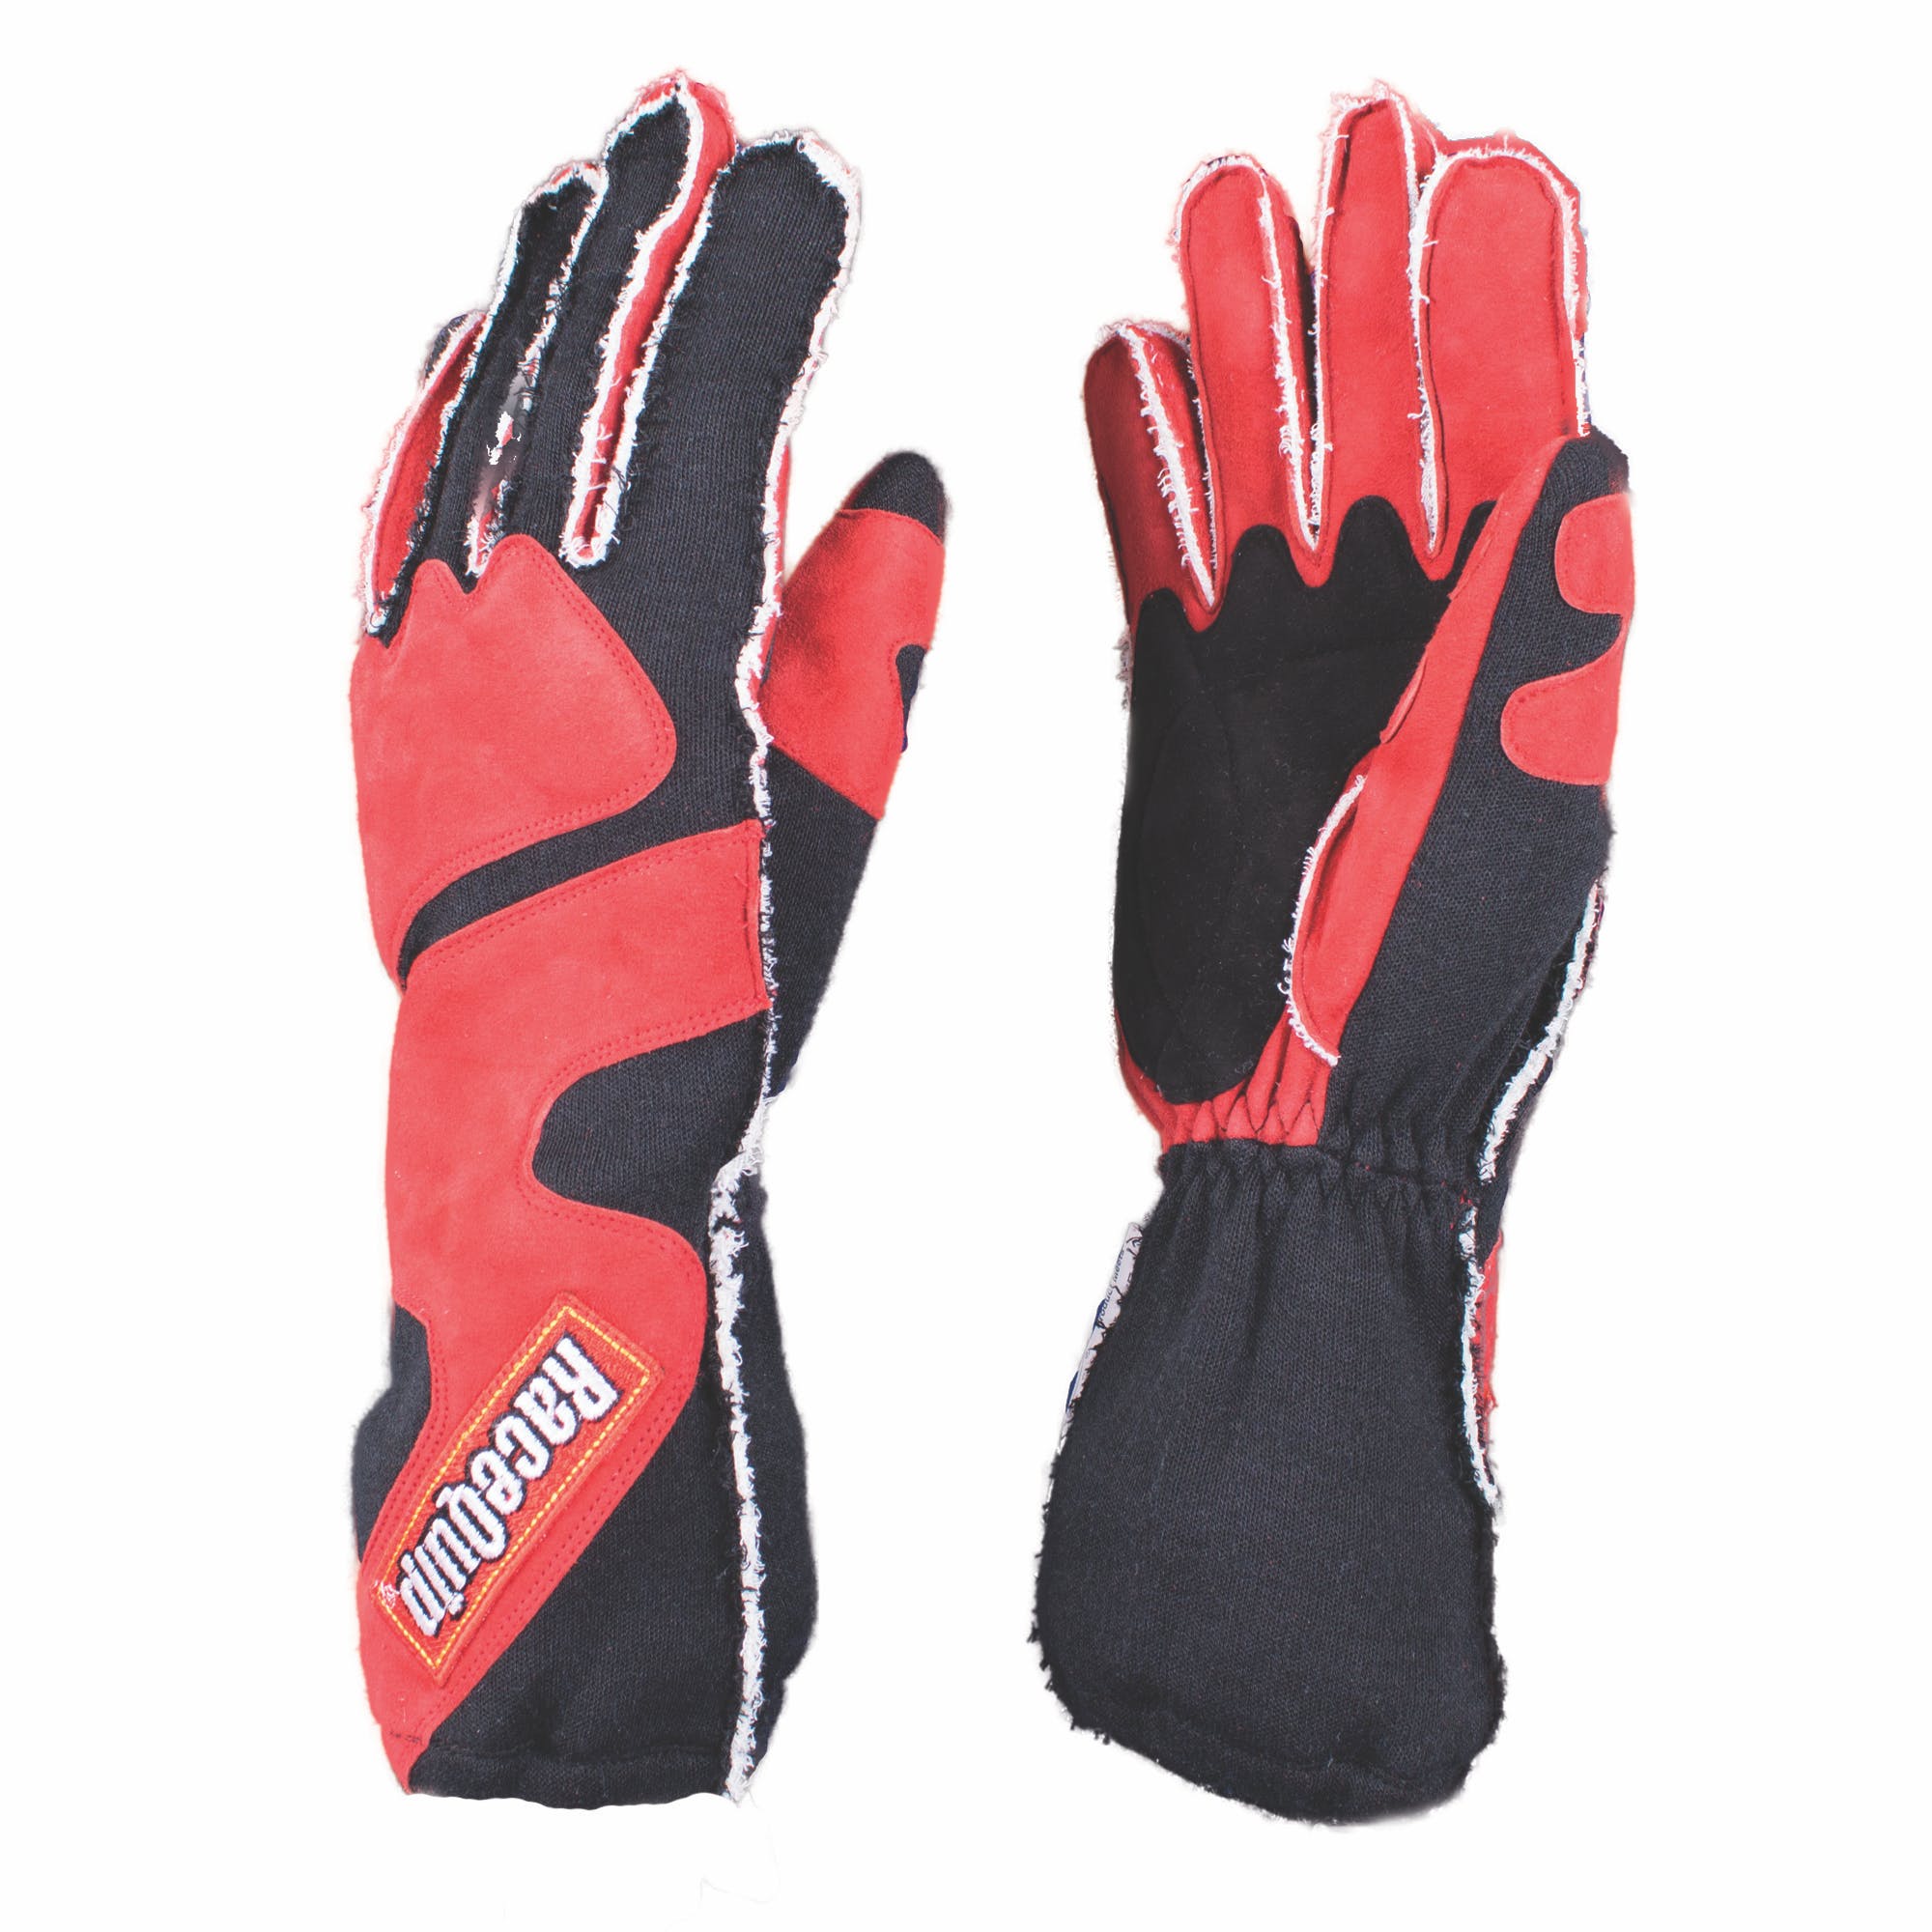 RaceQuip 356107 SFI-5 Angle-Cut Cuffed Racing Gloves (Red/Black, XX-Large)